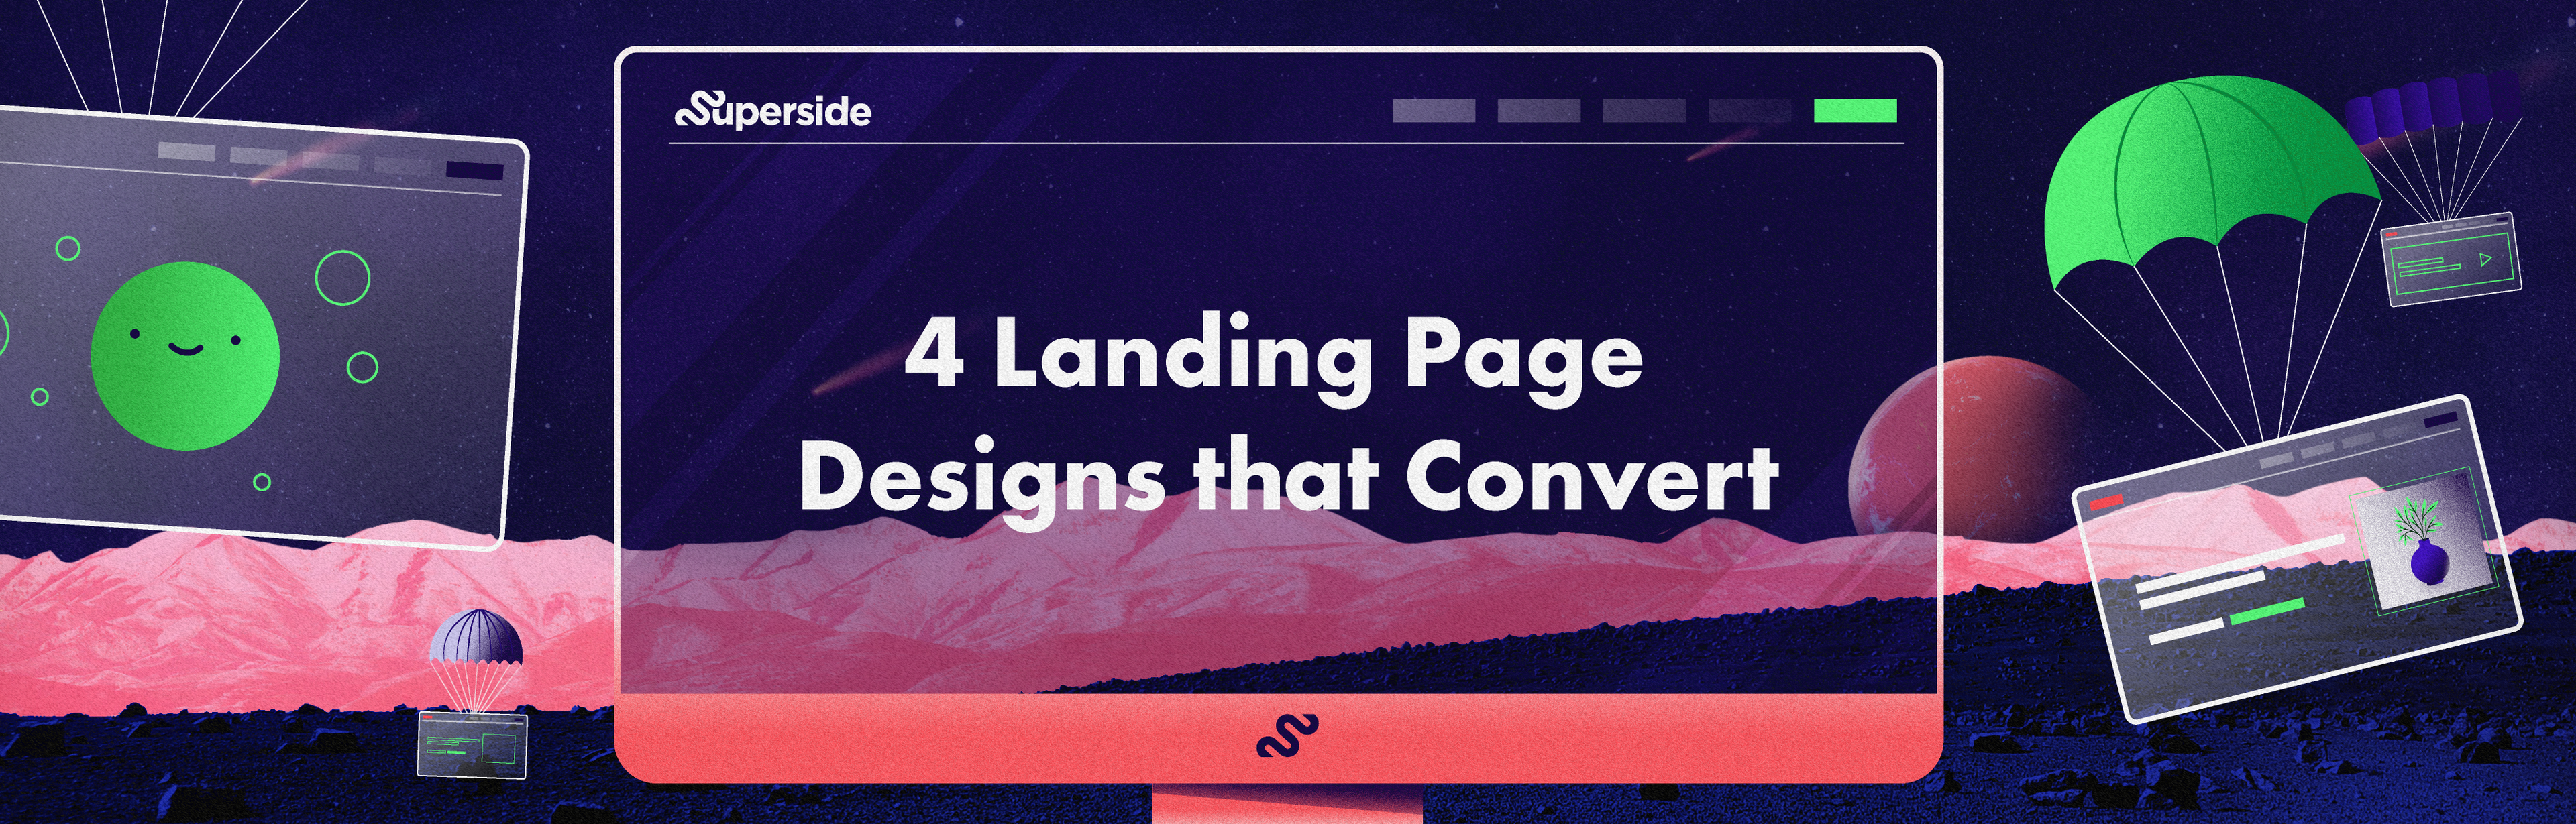 4 Landing Page Ideas to Drive More Conversions